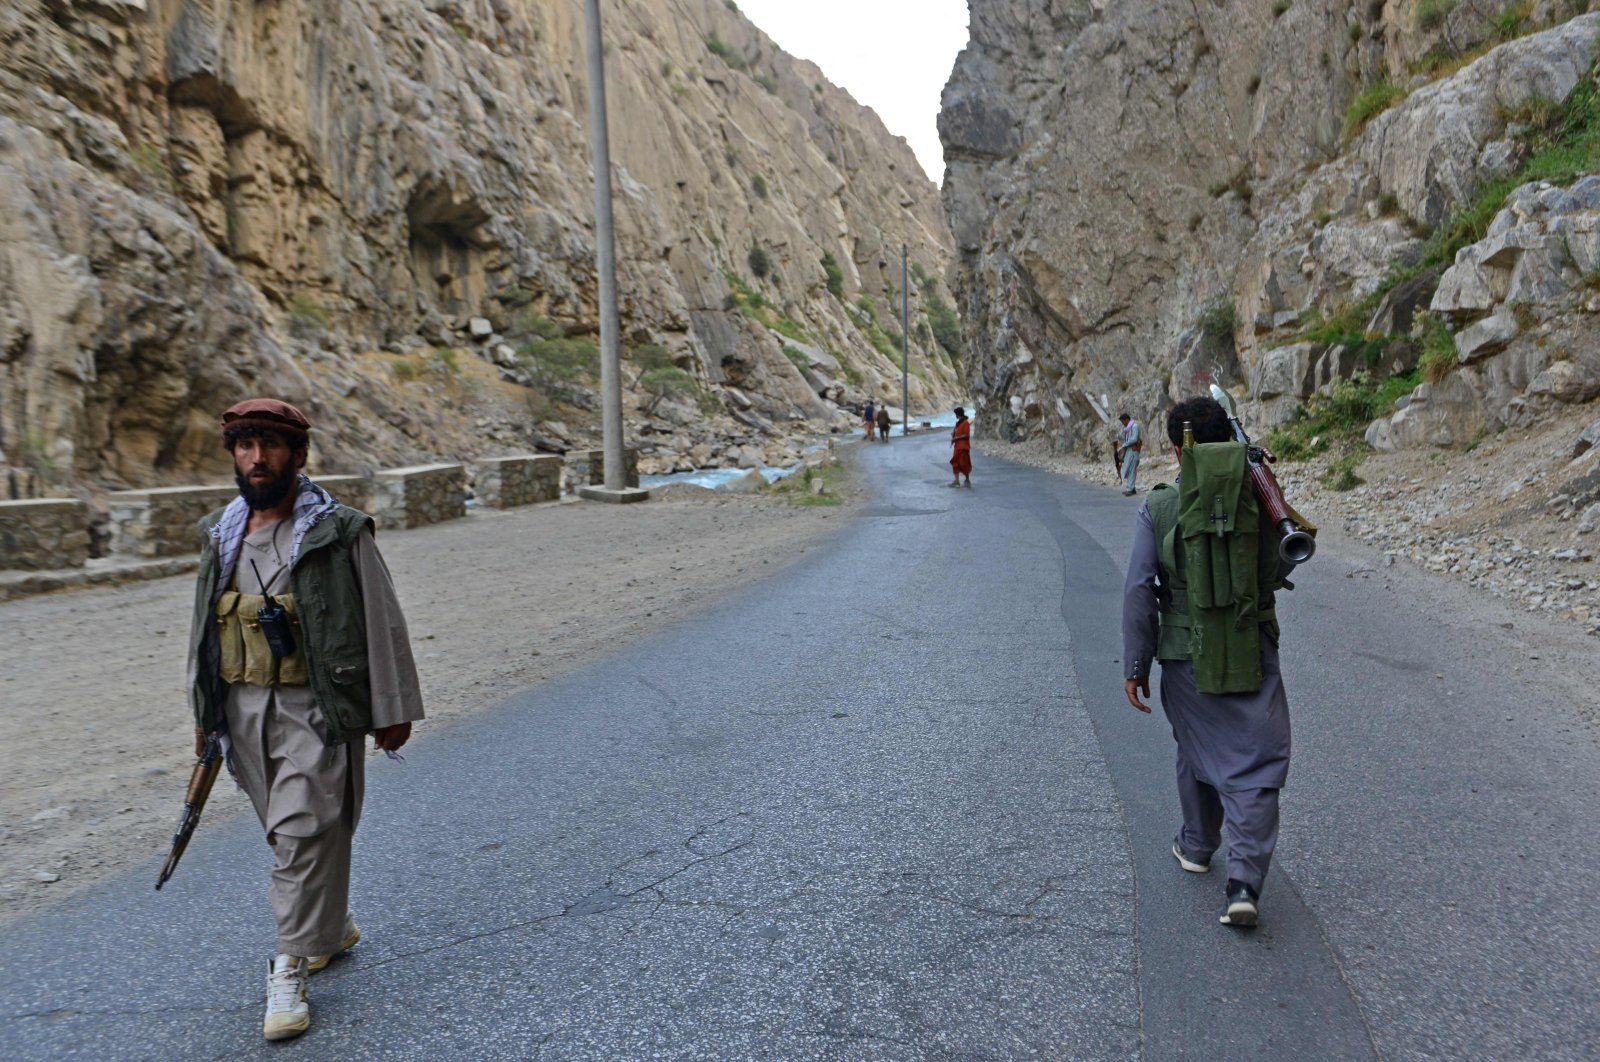 Afghan resistance movement and anti-Taliban uprising forces personnel patrol along a road in Rah-e Tang, Panjshir province, Afghanistan, Aug. 29, 2021. (AFP Photo)